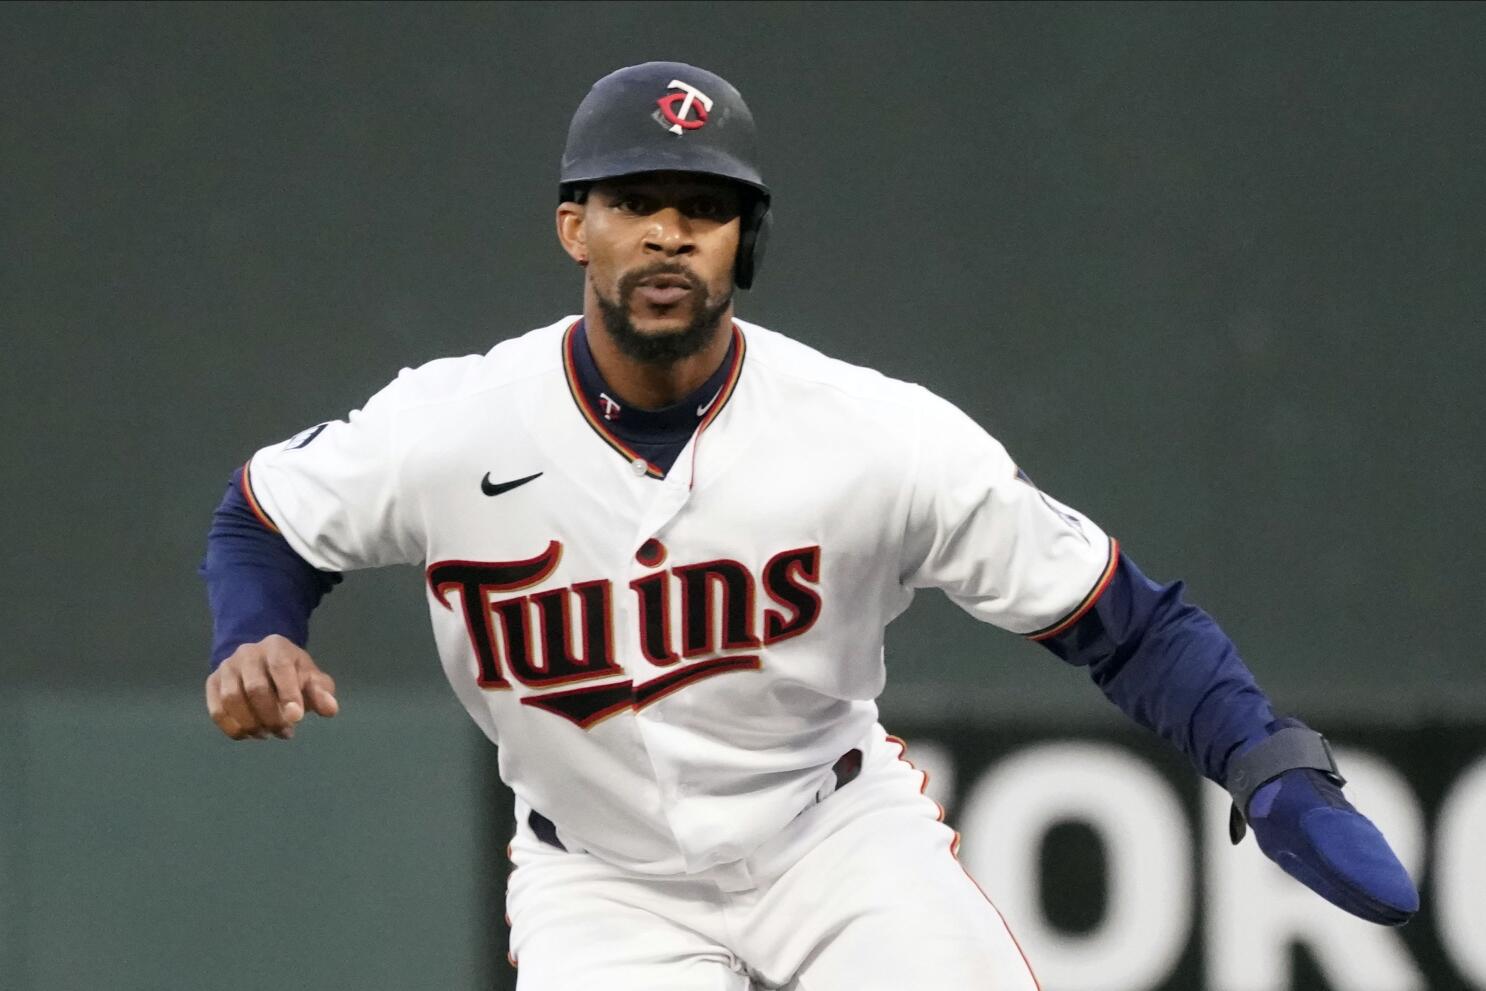 Safe at home: Buxton relishes comfort of staying with Twins - The